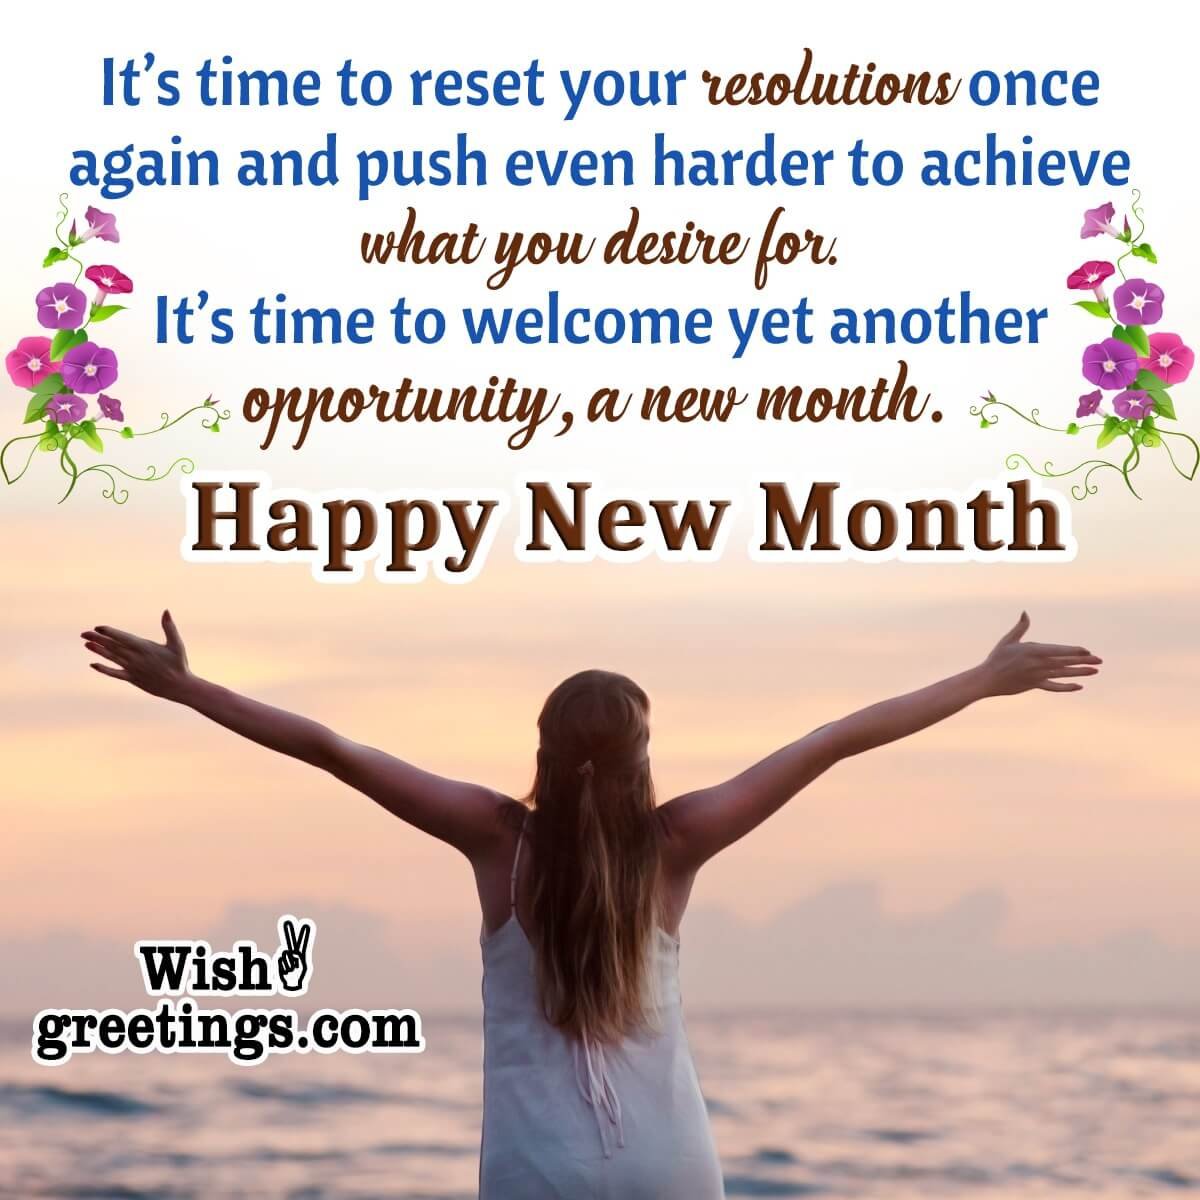 Happy New Month Inspirational